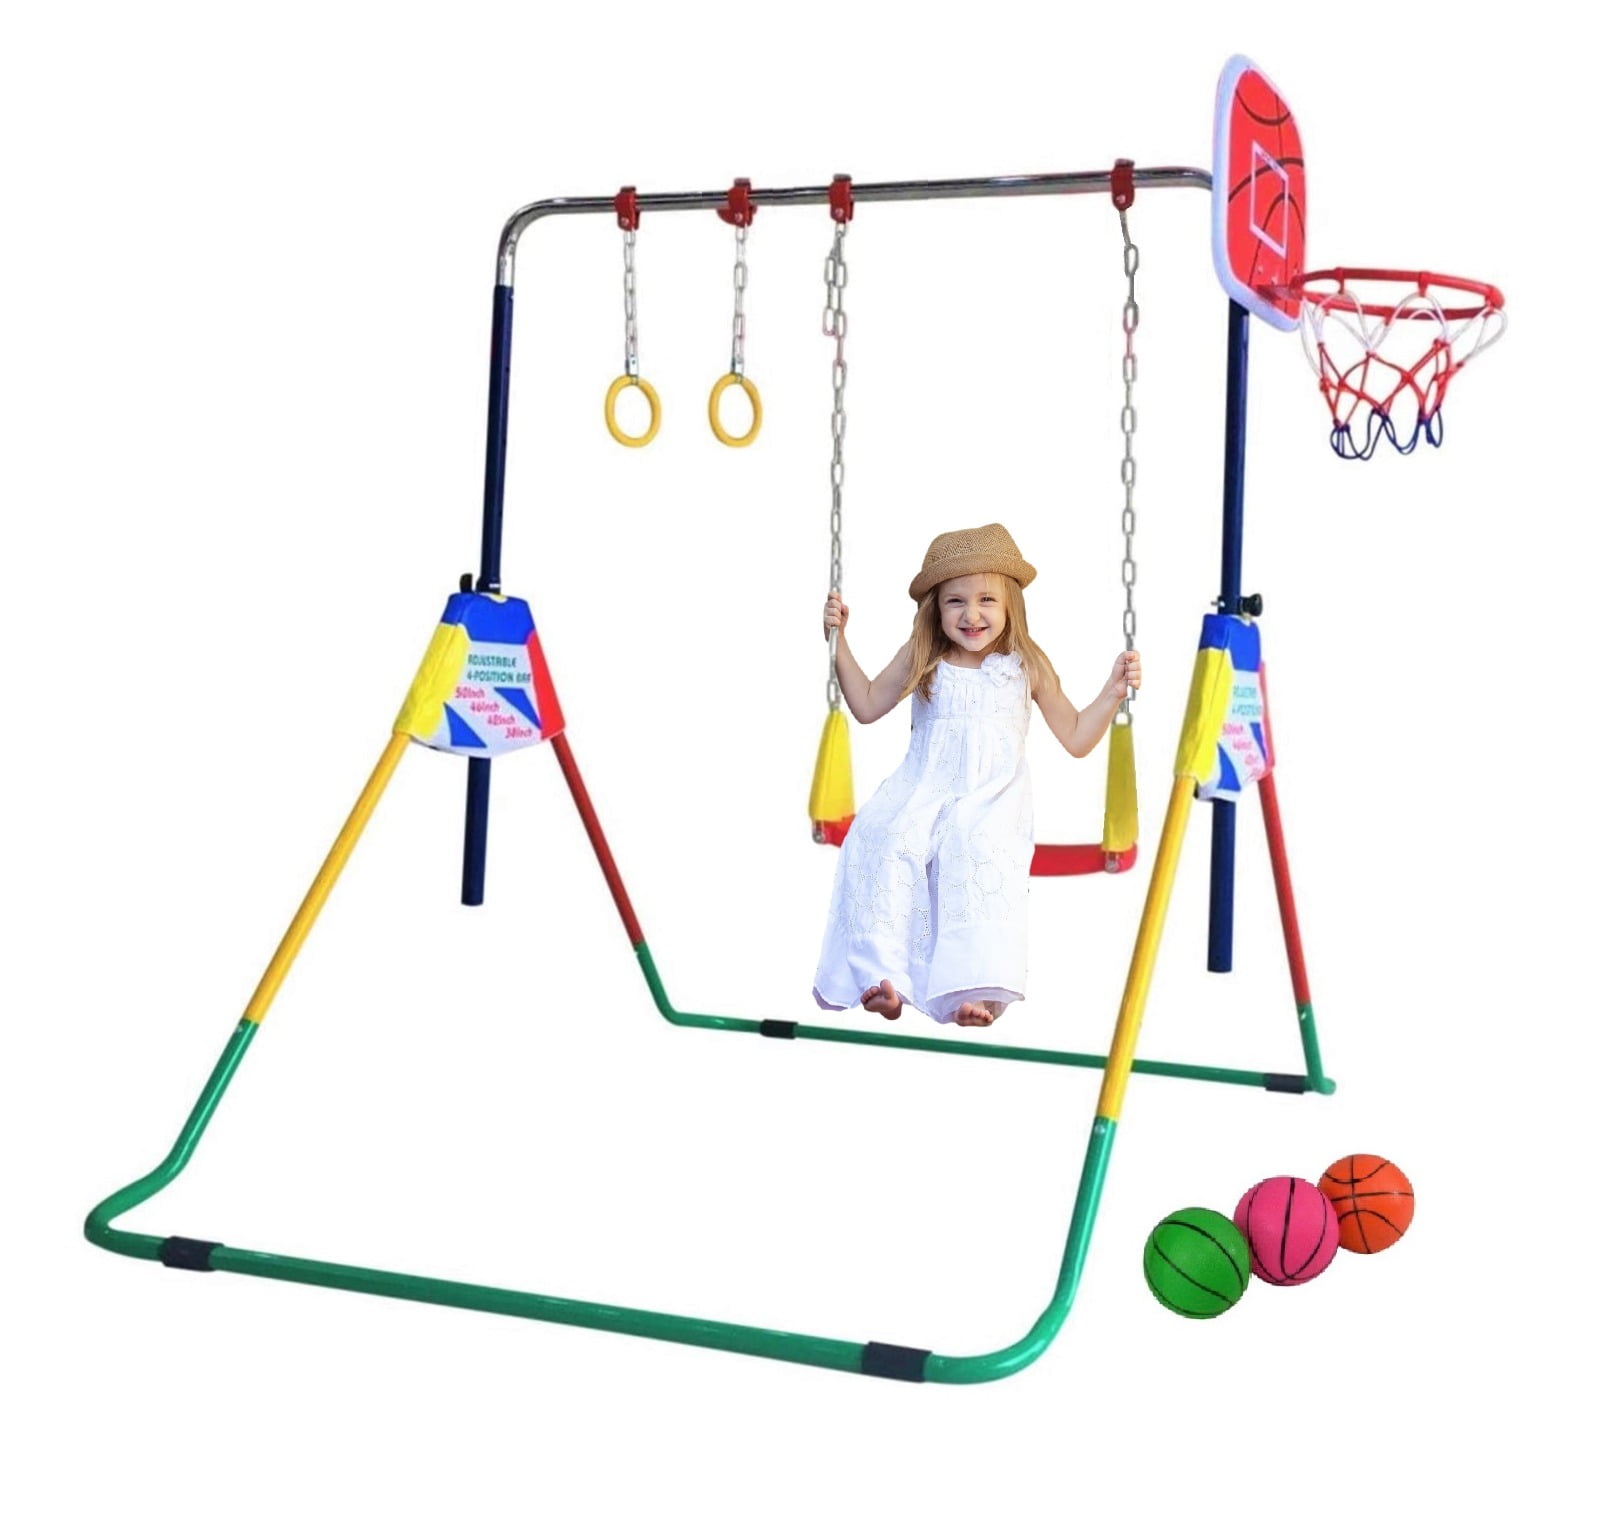 IPOTCH Heavy Duty Kids Swing Seat Buoy Ball Swings Set with Hanging Rope Child Birthday Gift for Boys Girls Blue